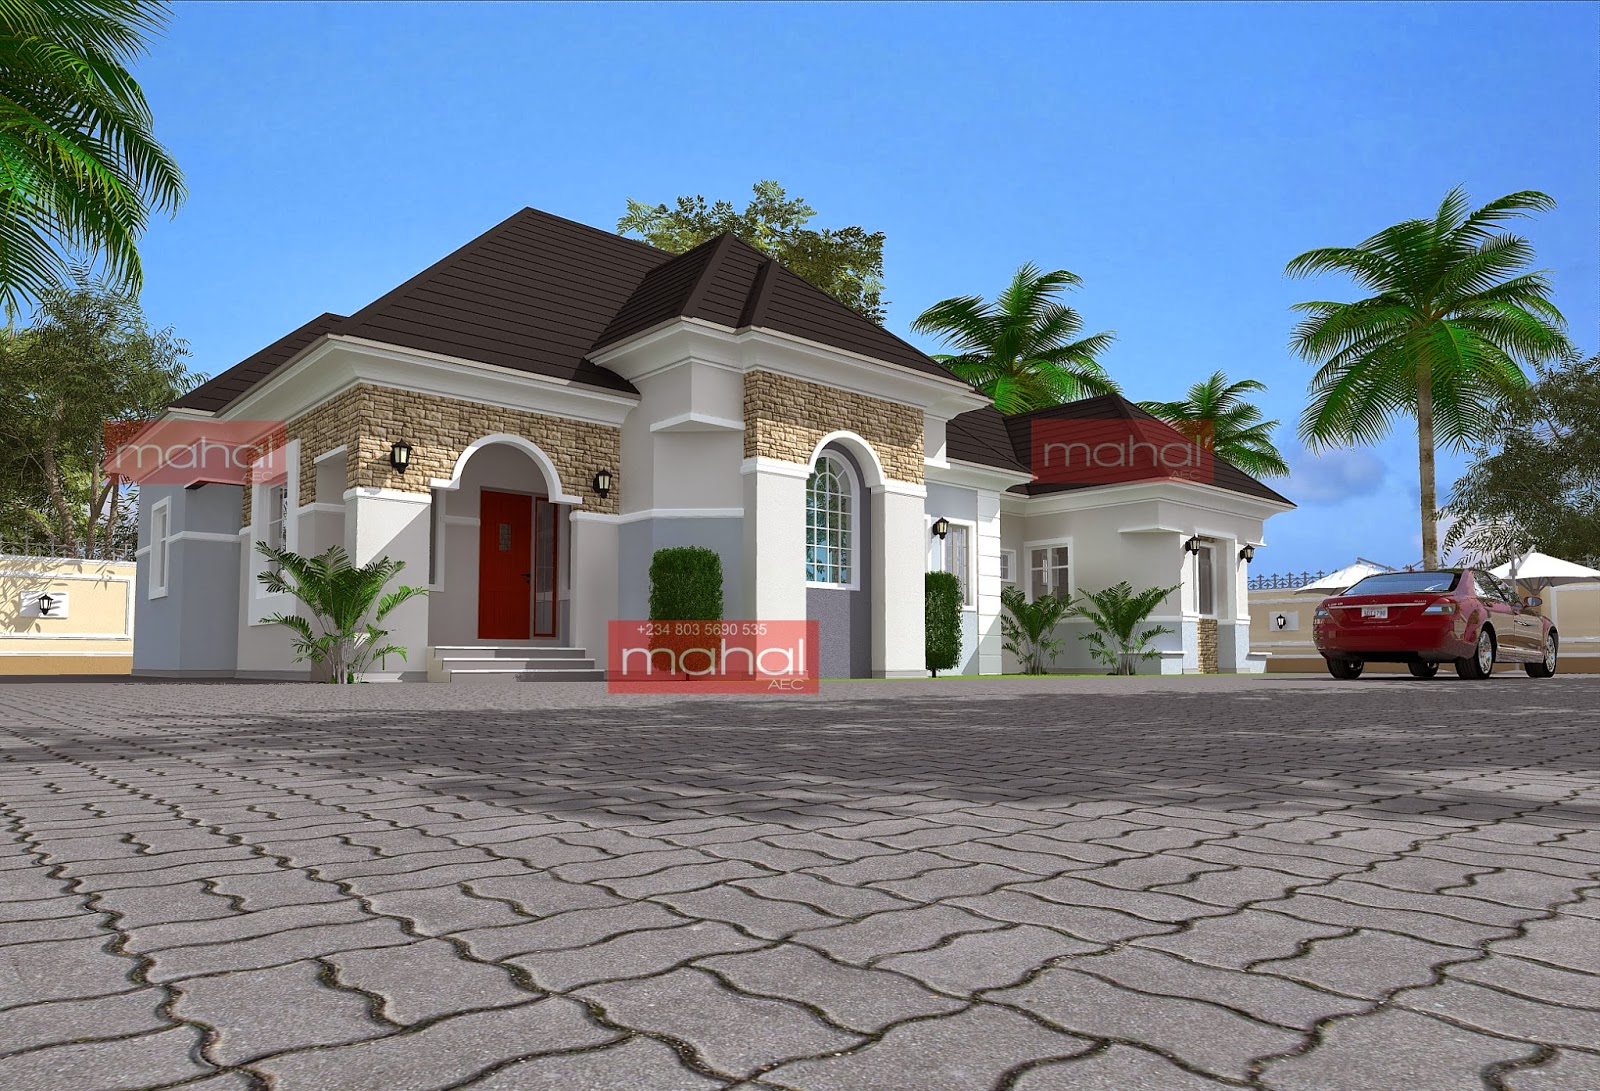  Contemporary  Nigerian Residential Architecture October 2013